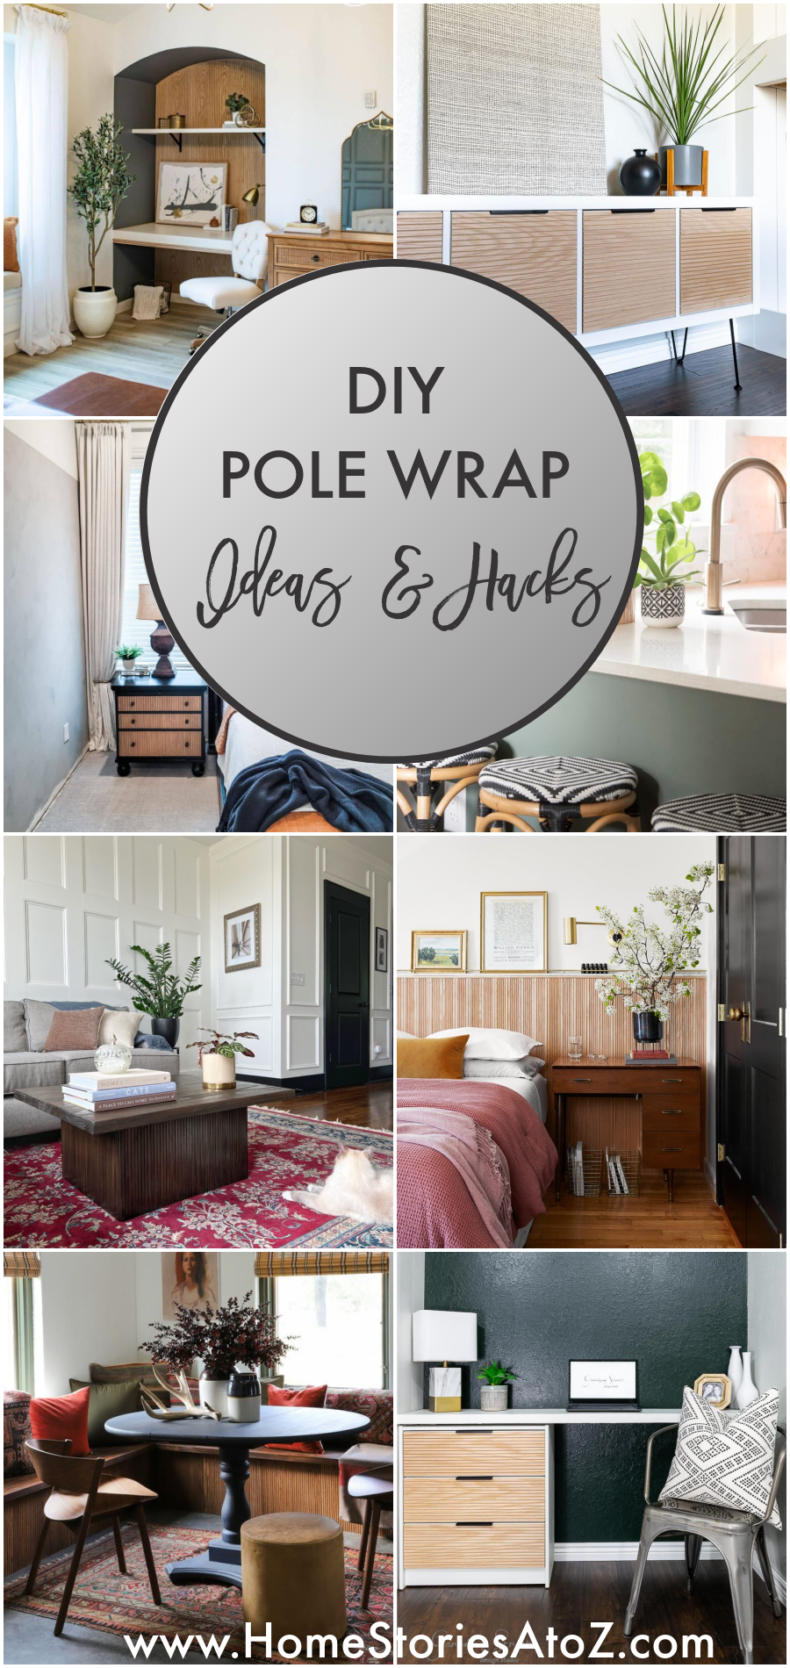 DIY Pole Wrap Ideas & Hacks by Home Stories A to Z